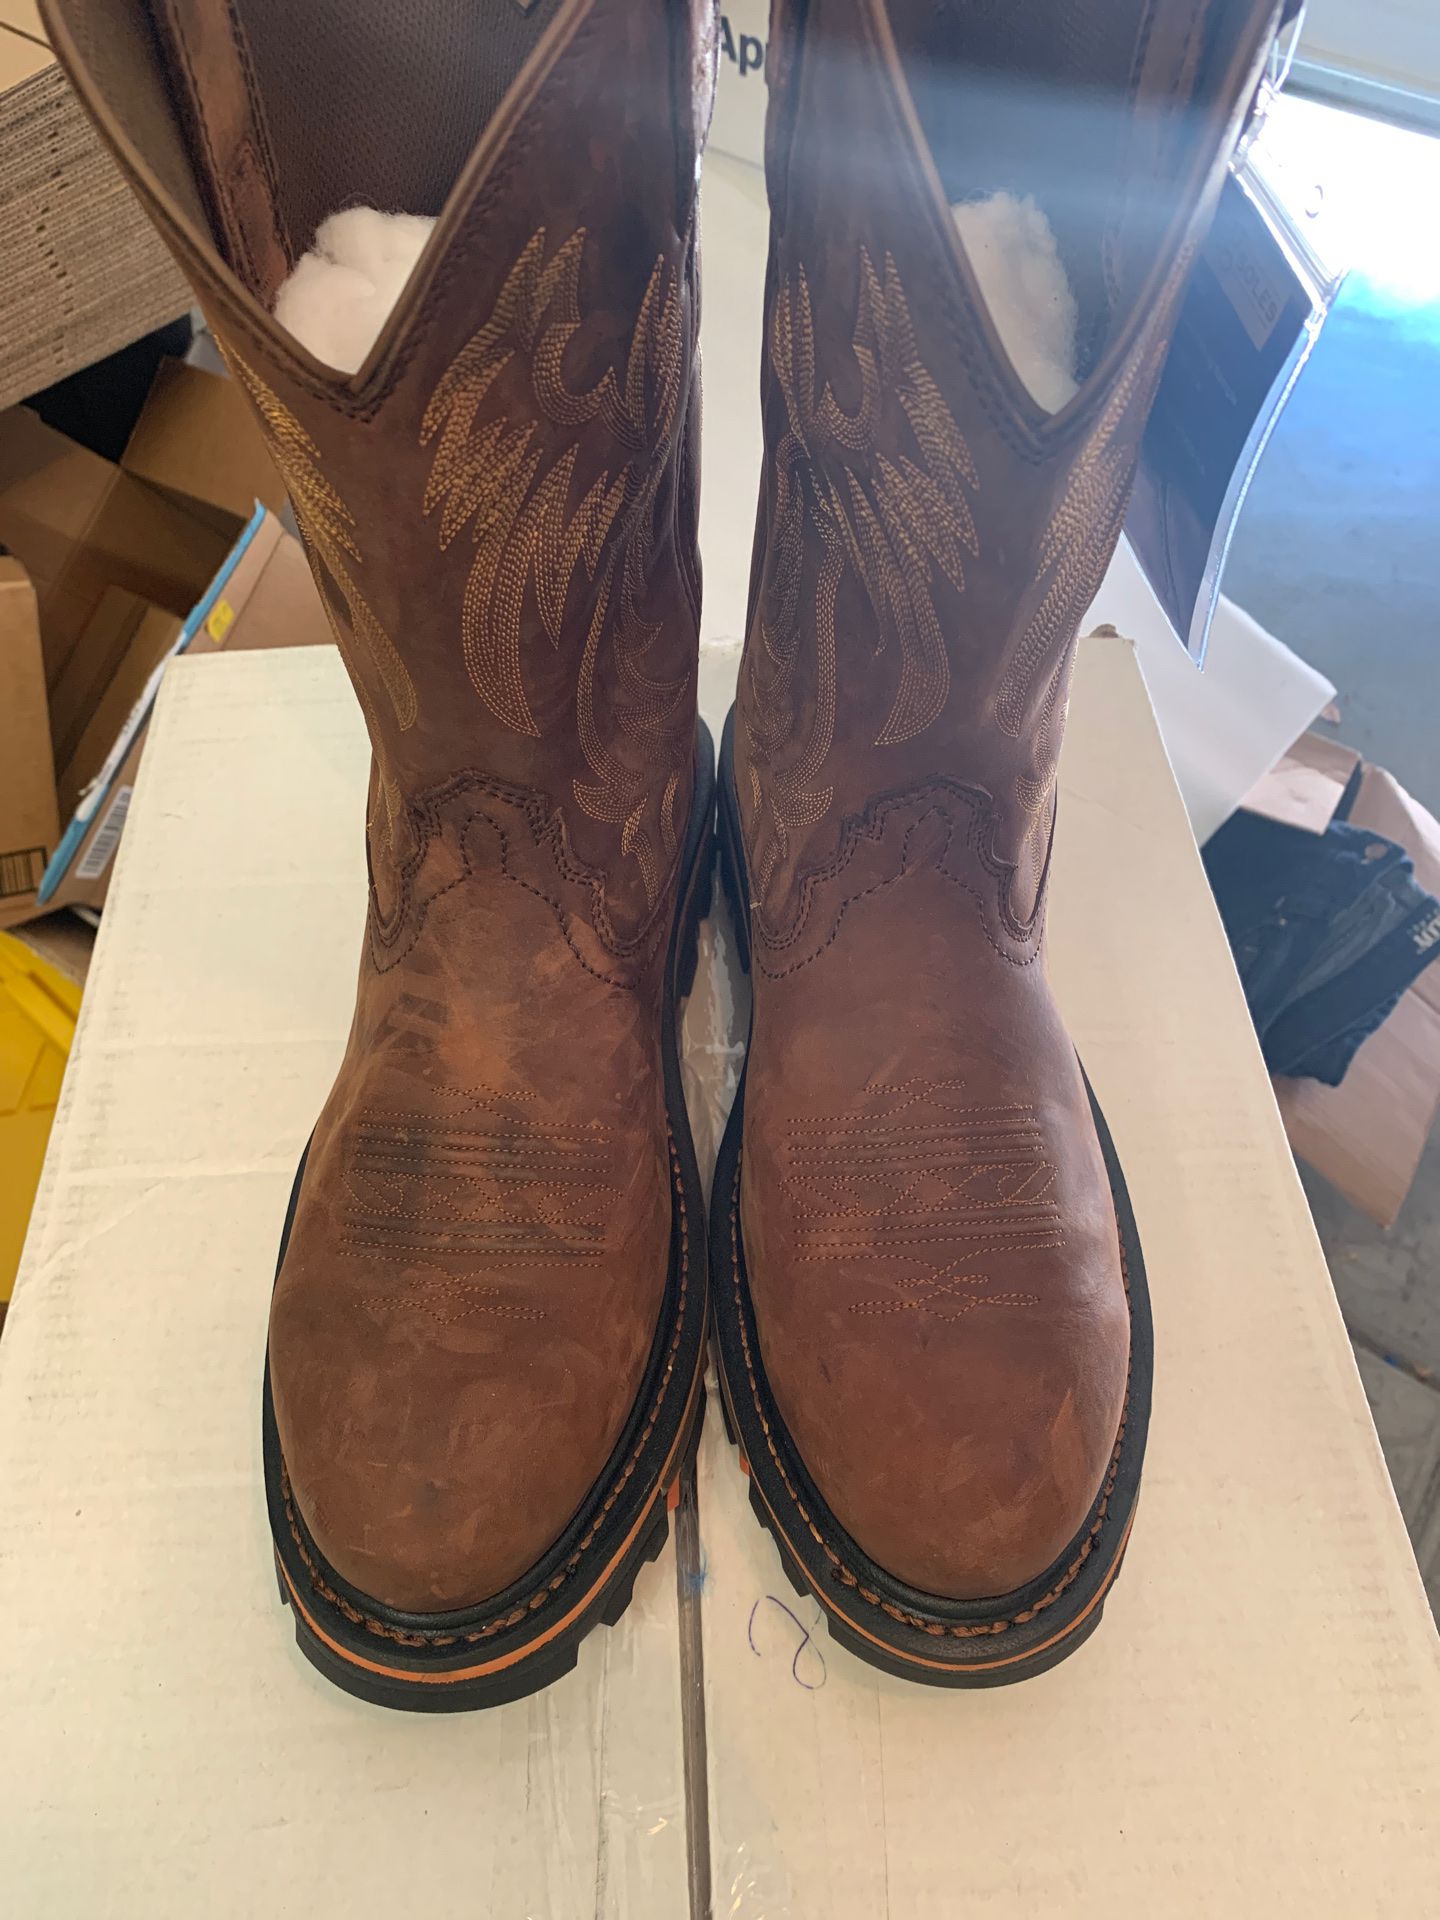 Cody James boots size -12